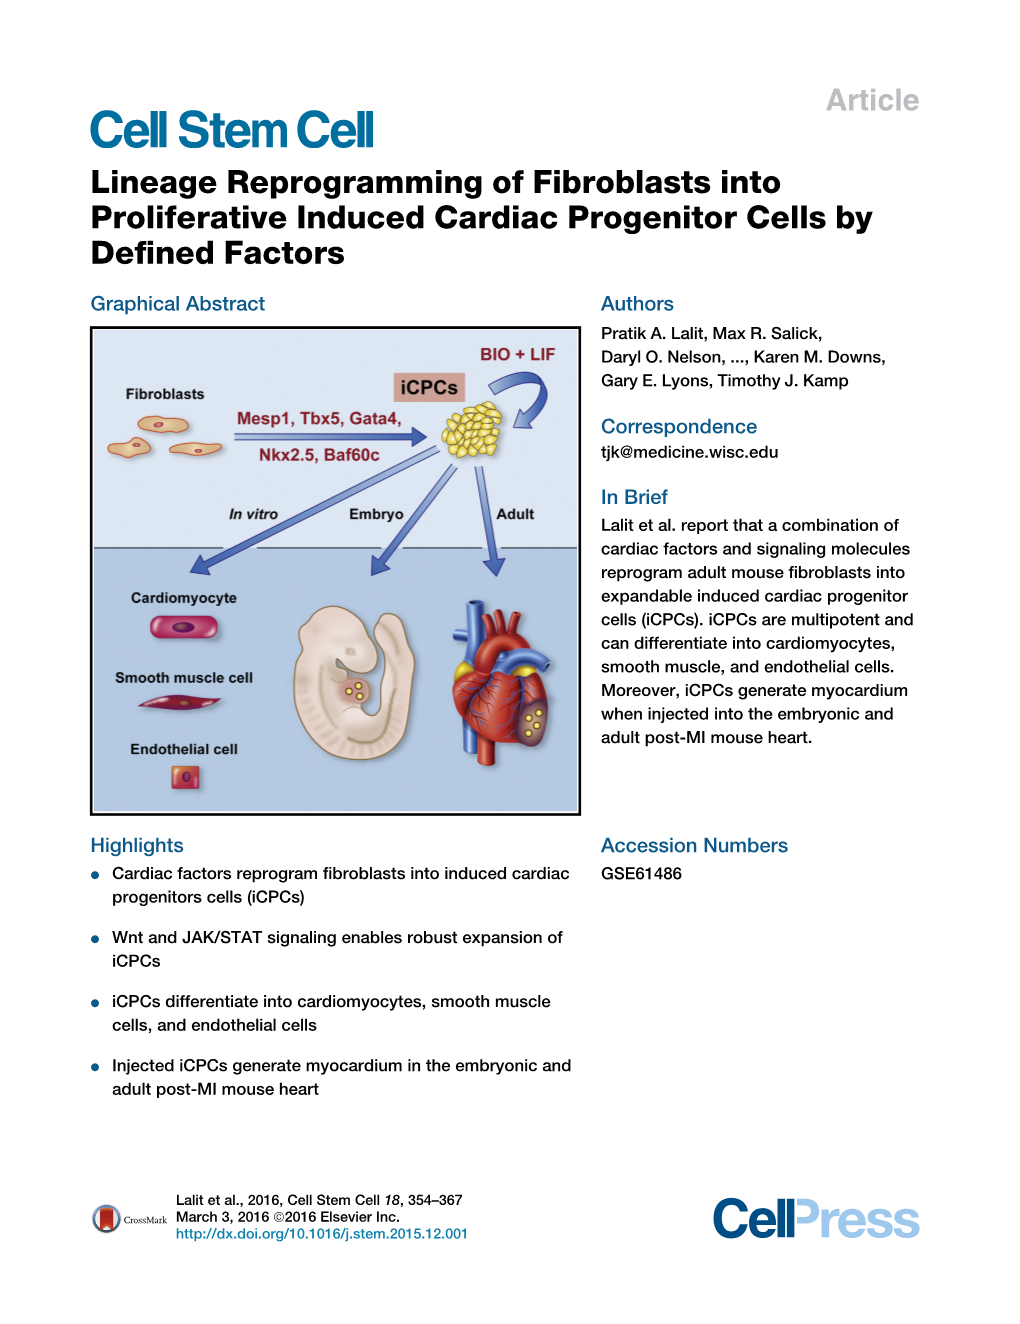 Lineage Reprogramming of Fibroblasts Into Proliferative Induced Cardiac Progenitor Cells by Deﬁned Factors